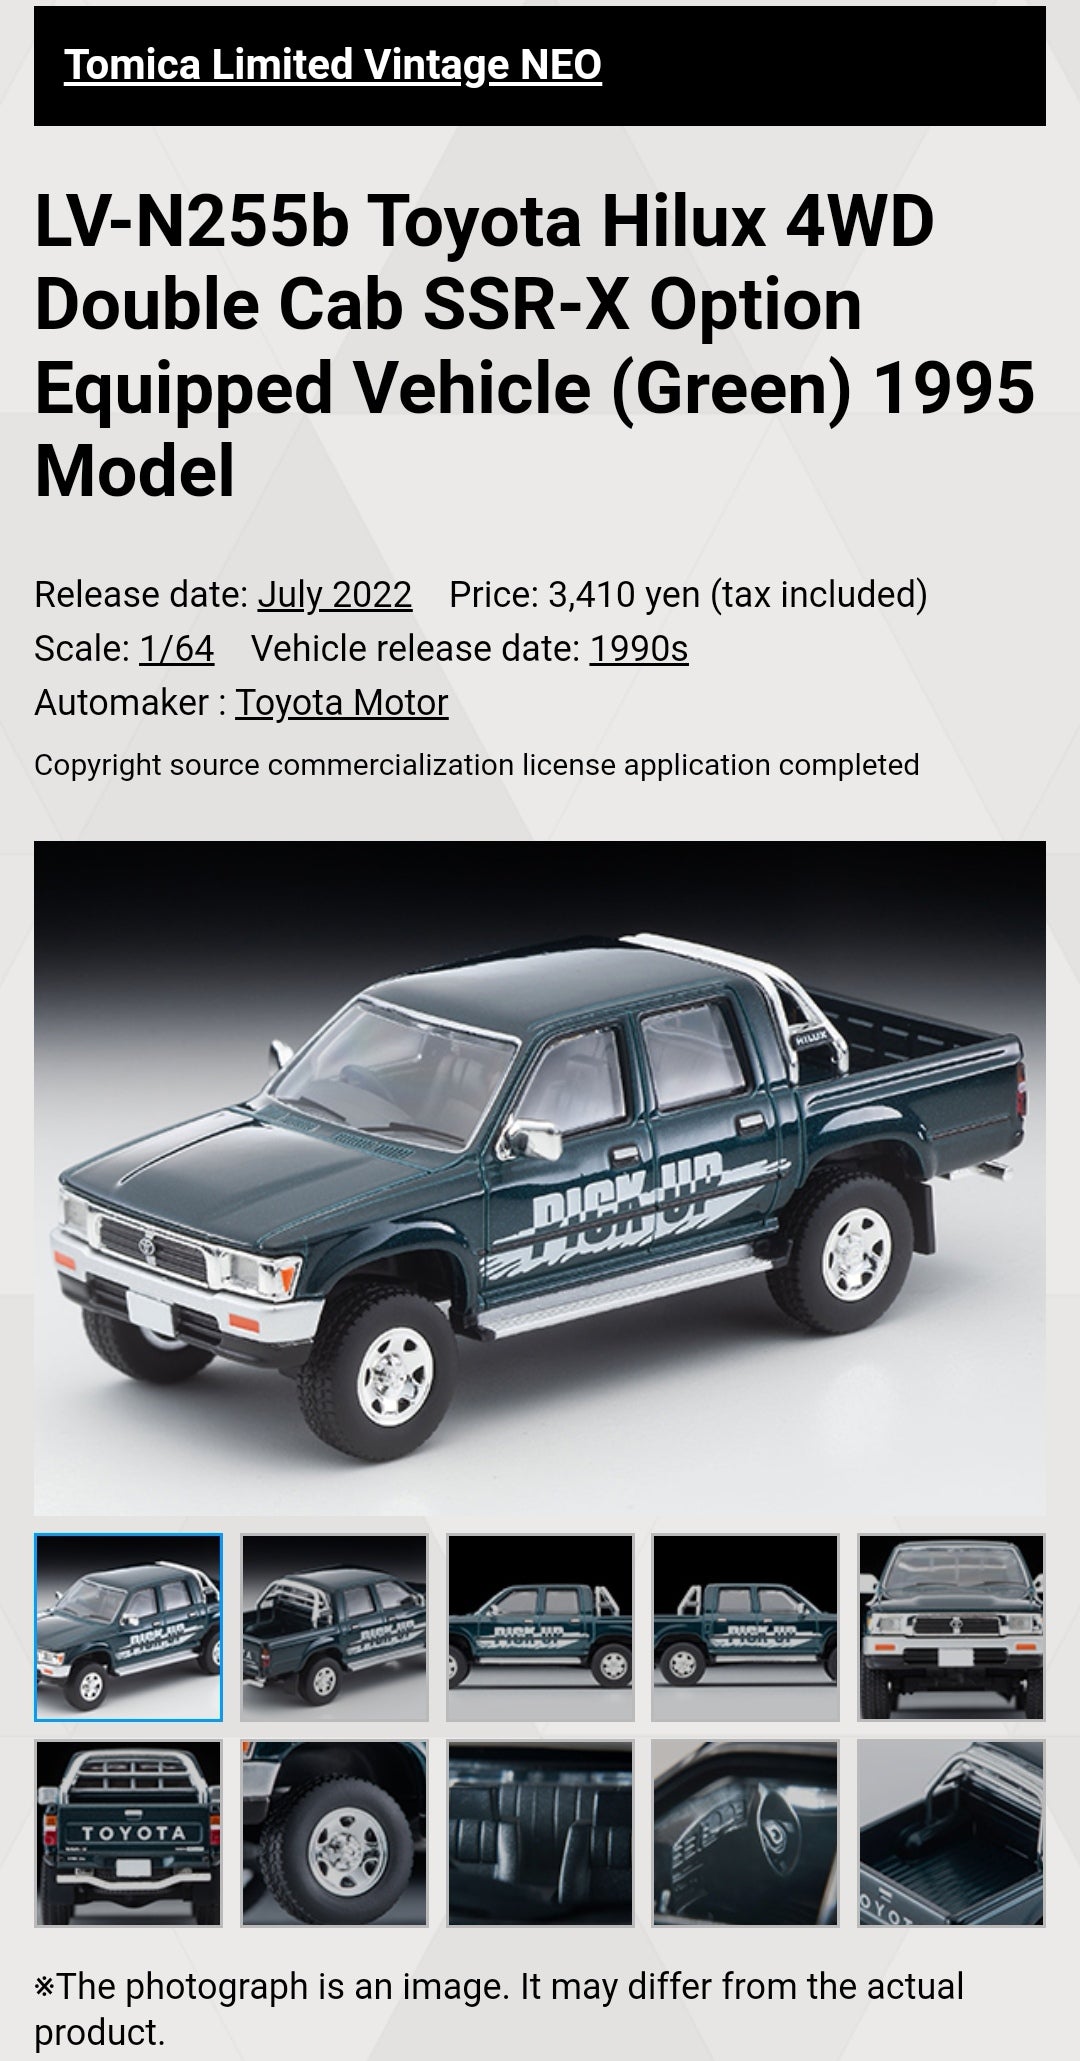 Tomica Limited Vintage Neo
LV-N255b TOYOTA HILUX 4WD Double Cab
SSR-X Optional Equipment Car Green 95 Model Takara Tomy